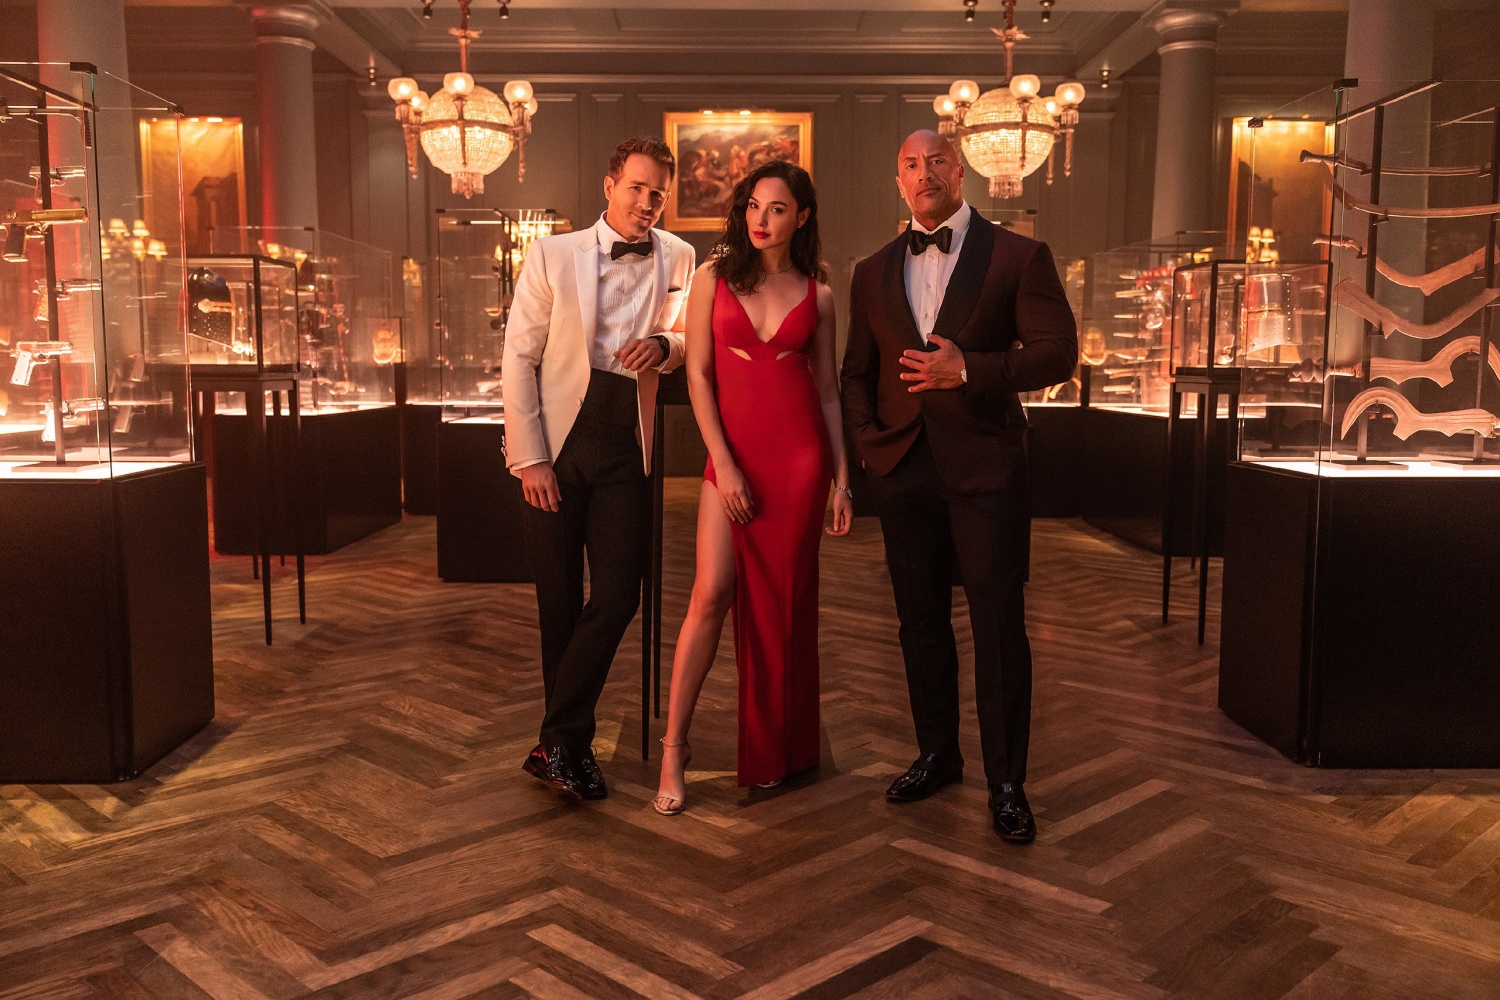 RED NOTICE - (L-R) RYAN REYNOLDS, GAL GADOT and DWAYNE ‘THE ROCK’ JOHNSON STAR IN NETFLIX’S RED NOTICE RELEASING NOVEMBER 12, 20